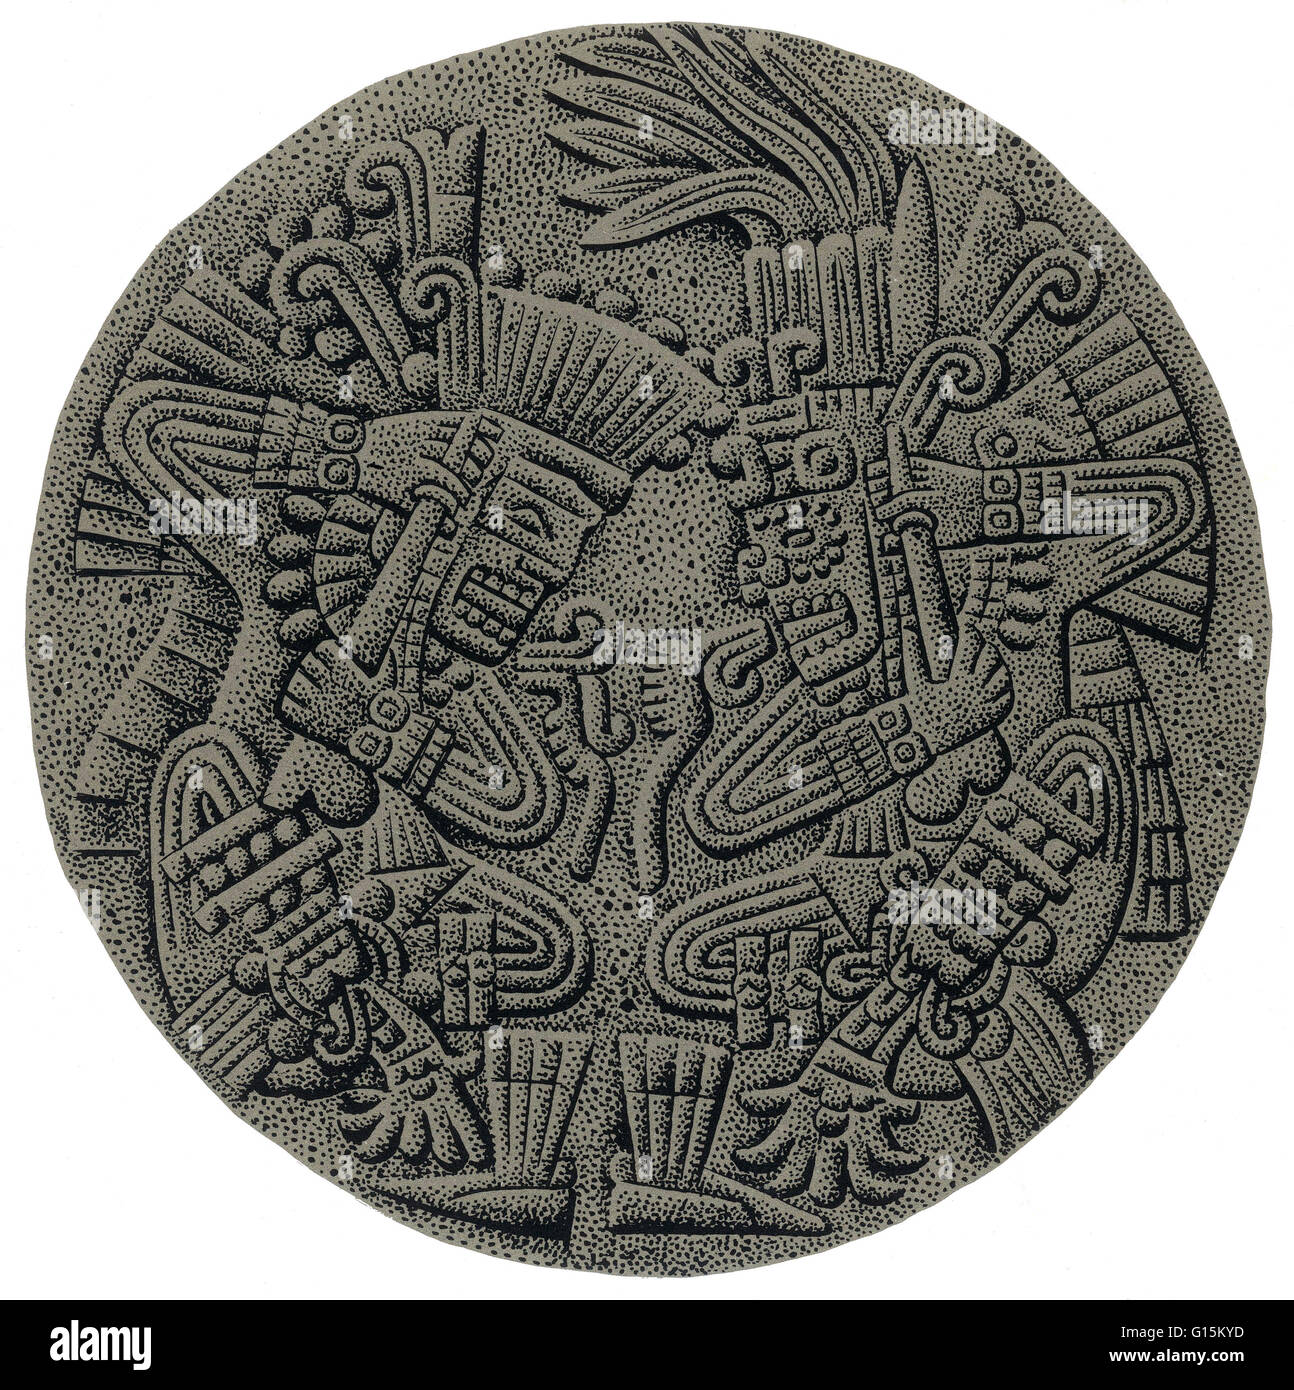 Tezcatlipoca was a central deity in Aztec religion. He is associated with a wide range of concepts, including the night sky, the night winds, hurricanes, the north, the earth, obsidian, enmity, discord, rulership, divination, temptation, jaguars, sorcery, Stock Photo